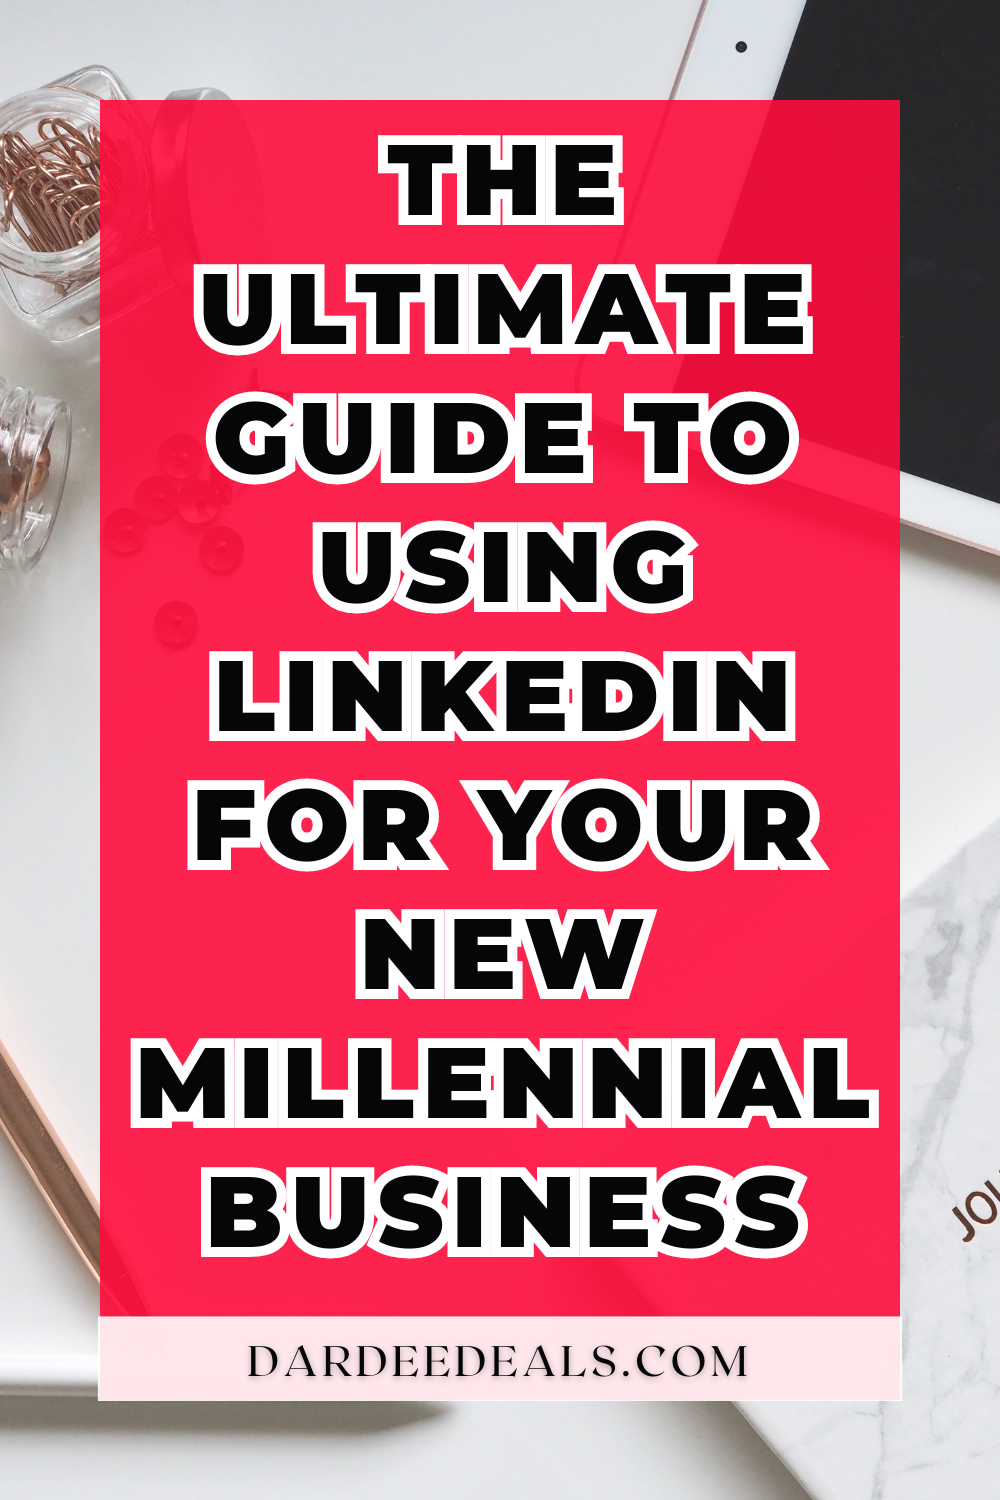 The Ultimate Guide to Using LinkedIn for Your New Millennial Business